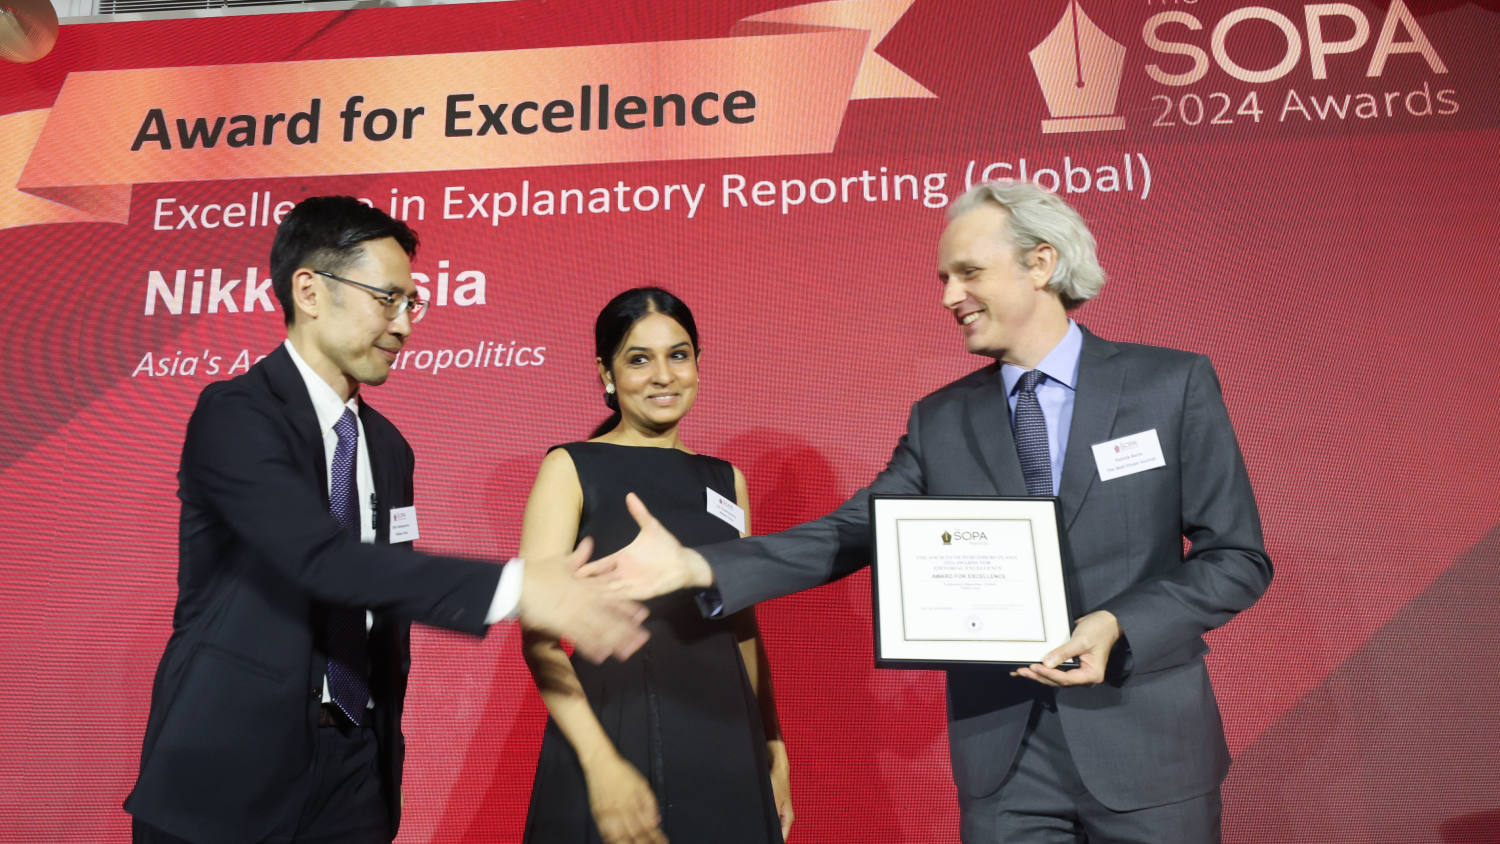 Nikkei Asia Wins SOPA Award for Explanatory Reporting on Hydropolitics